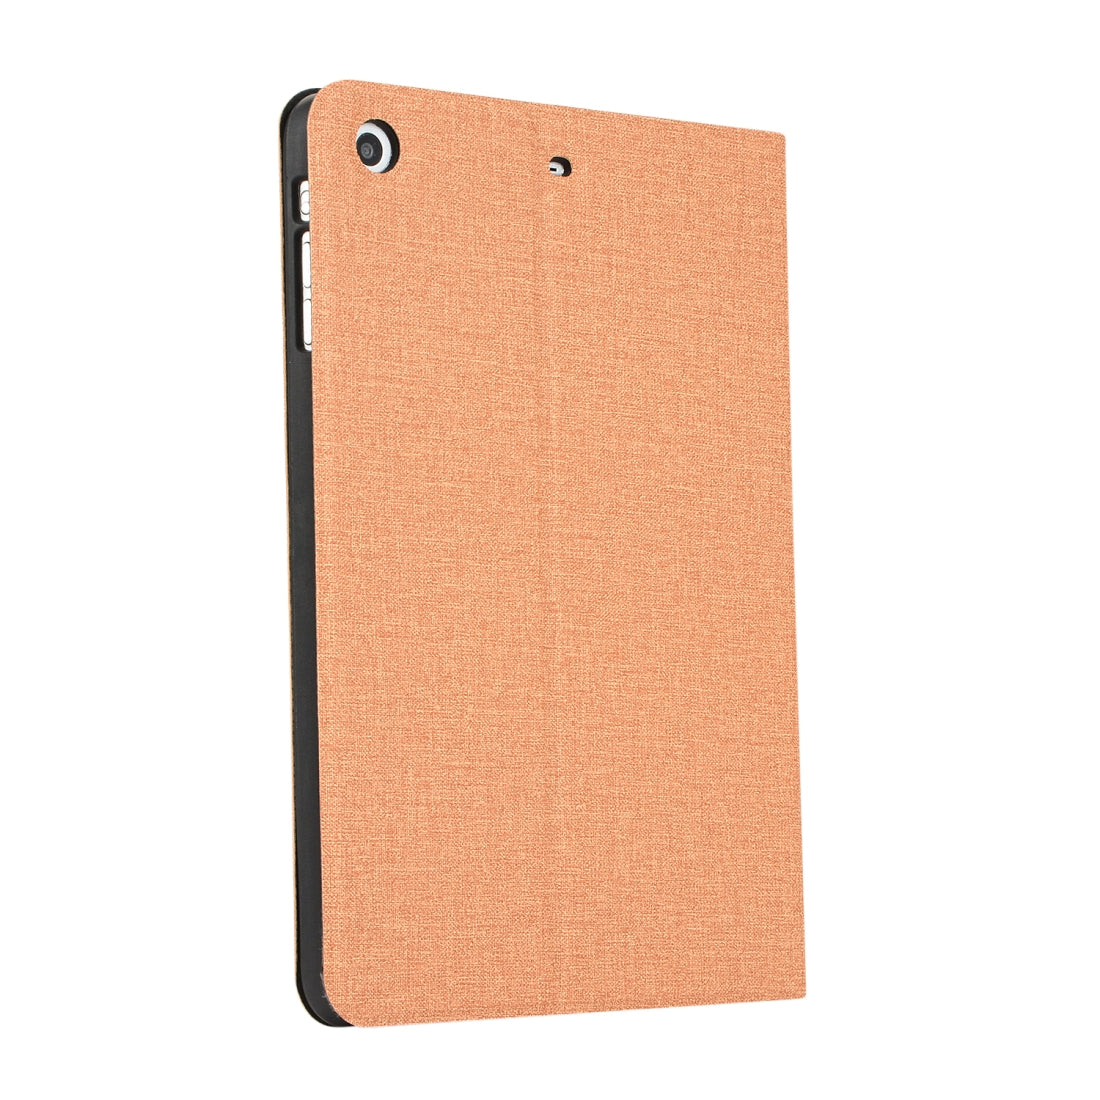 Universal Voltage Craft Cloth TPU Protective Case for iPad Mini 1 / 2 / 3, with Holder (Gold)